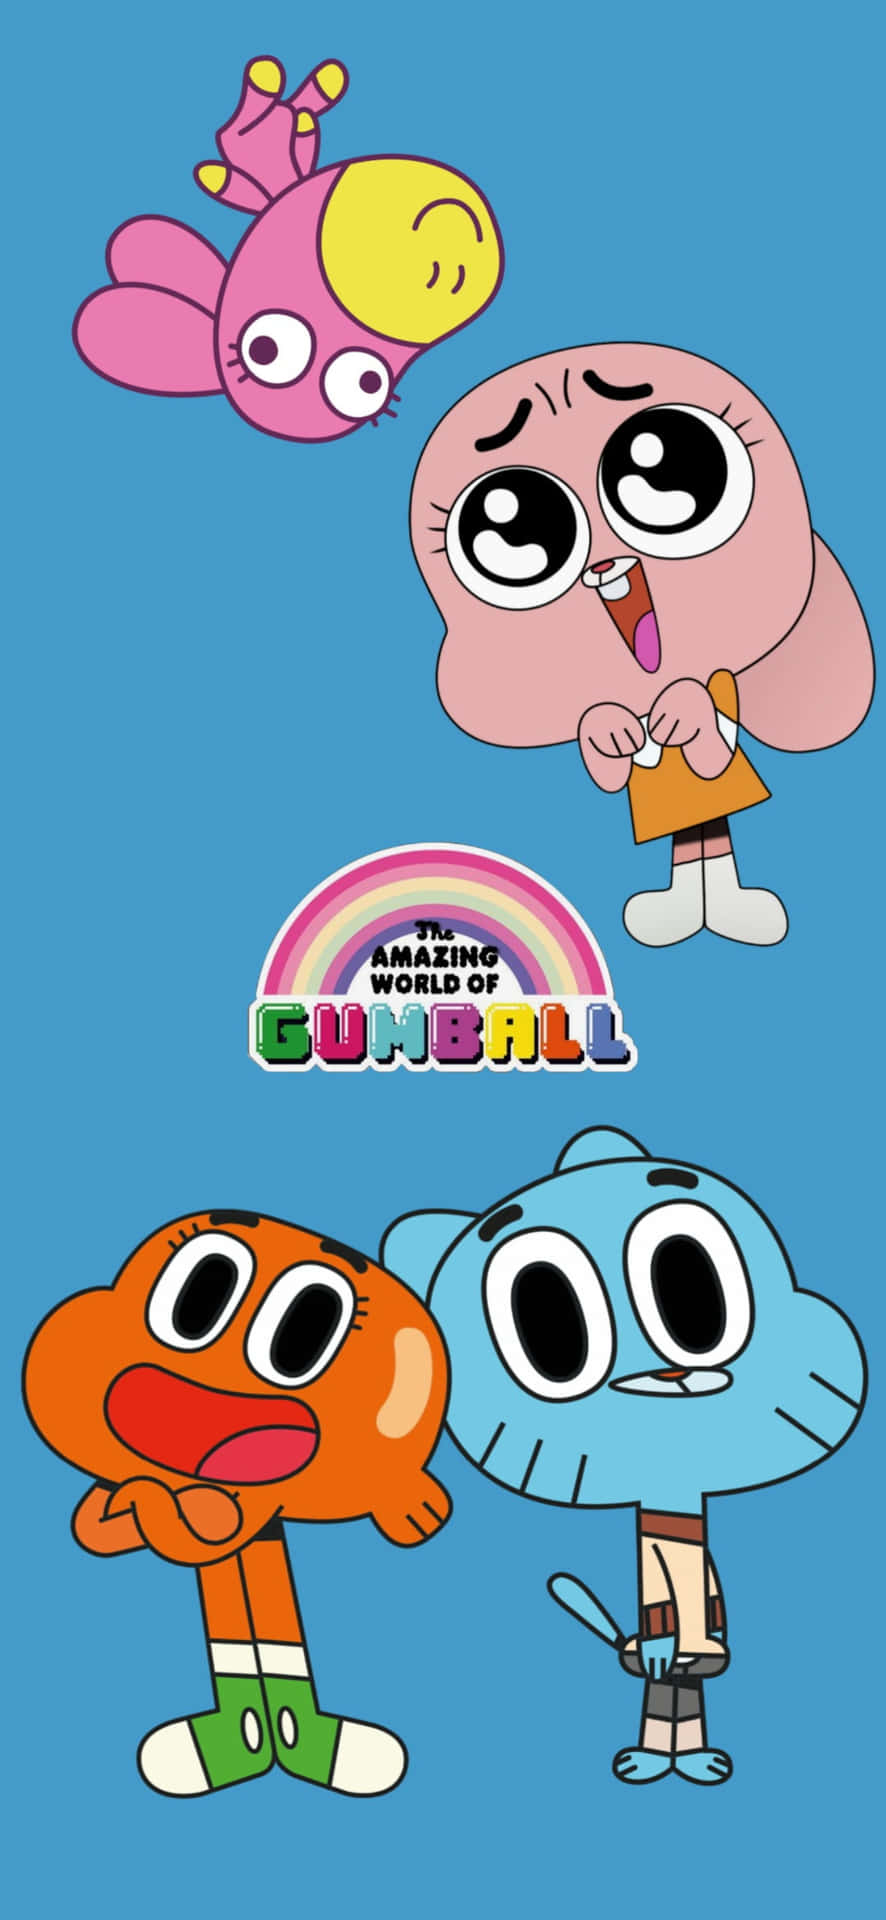 The Gumball Cartoon Characters Are Shown On A Blue Background Wallpaper